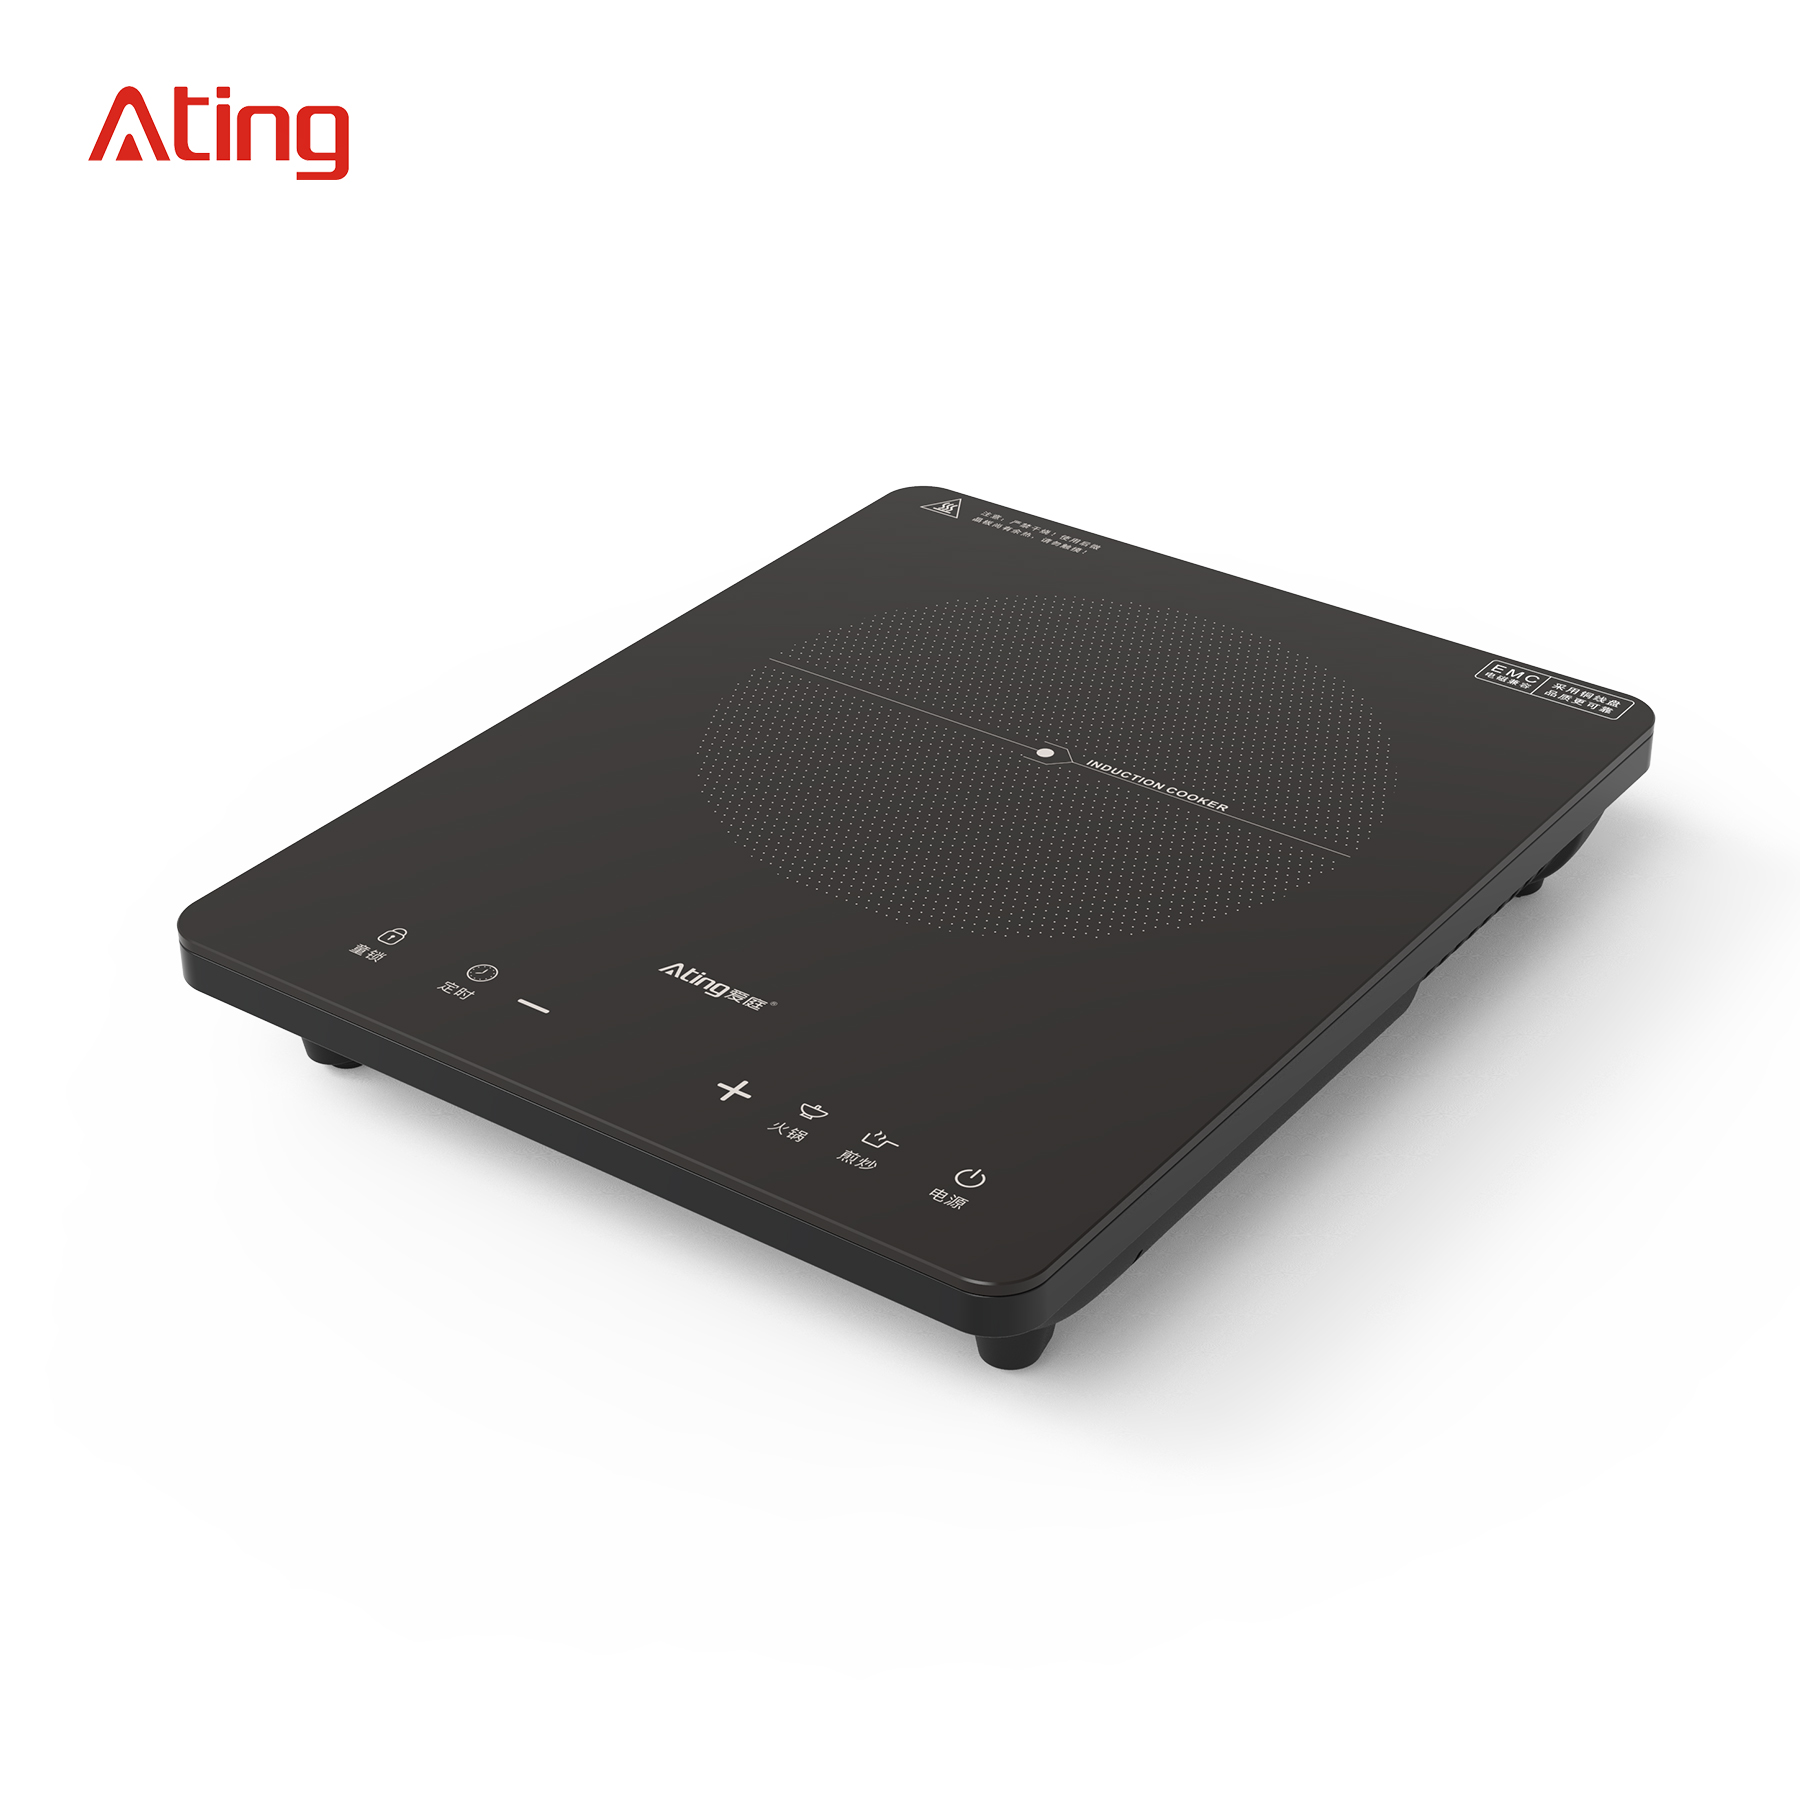 IH-F20M-B, 2000W induction cooker with touch control